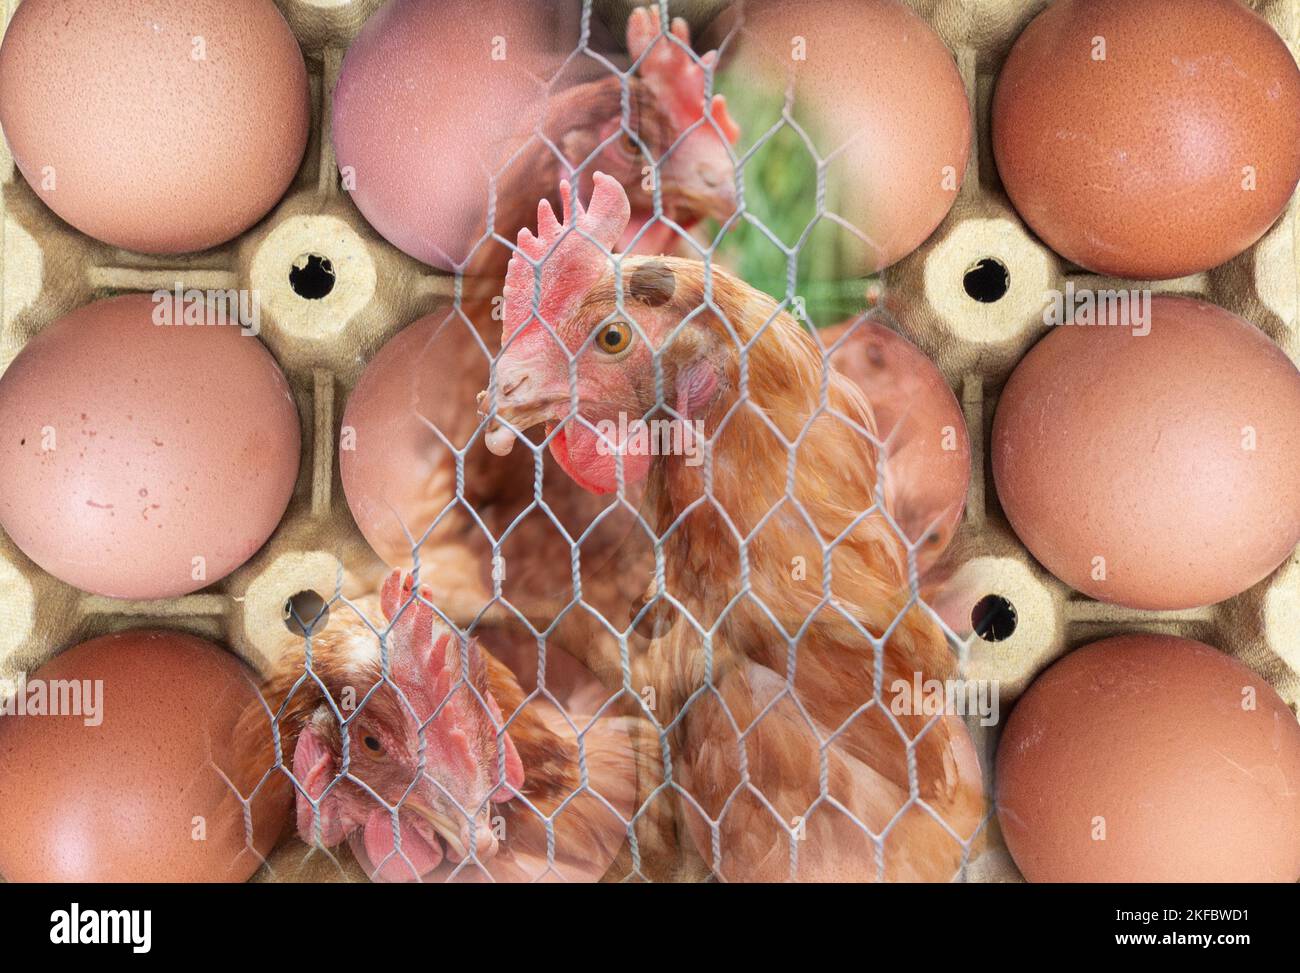 Egg shortage, rising egg prices, inflation, cost of living crisis, bird flu, avian flu...concept Stock Photo